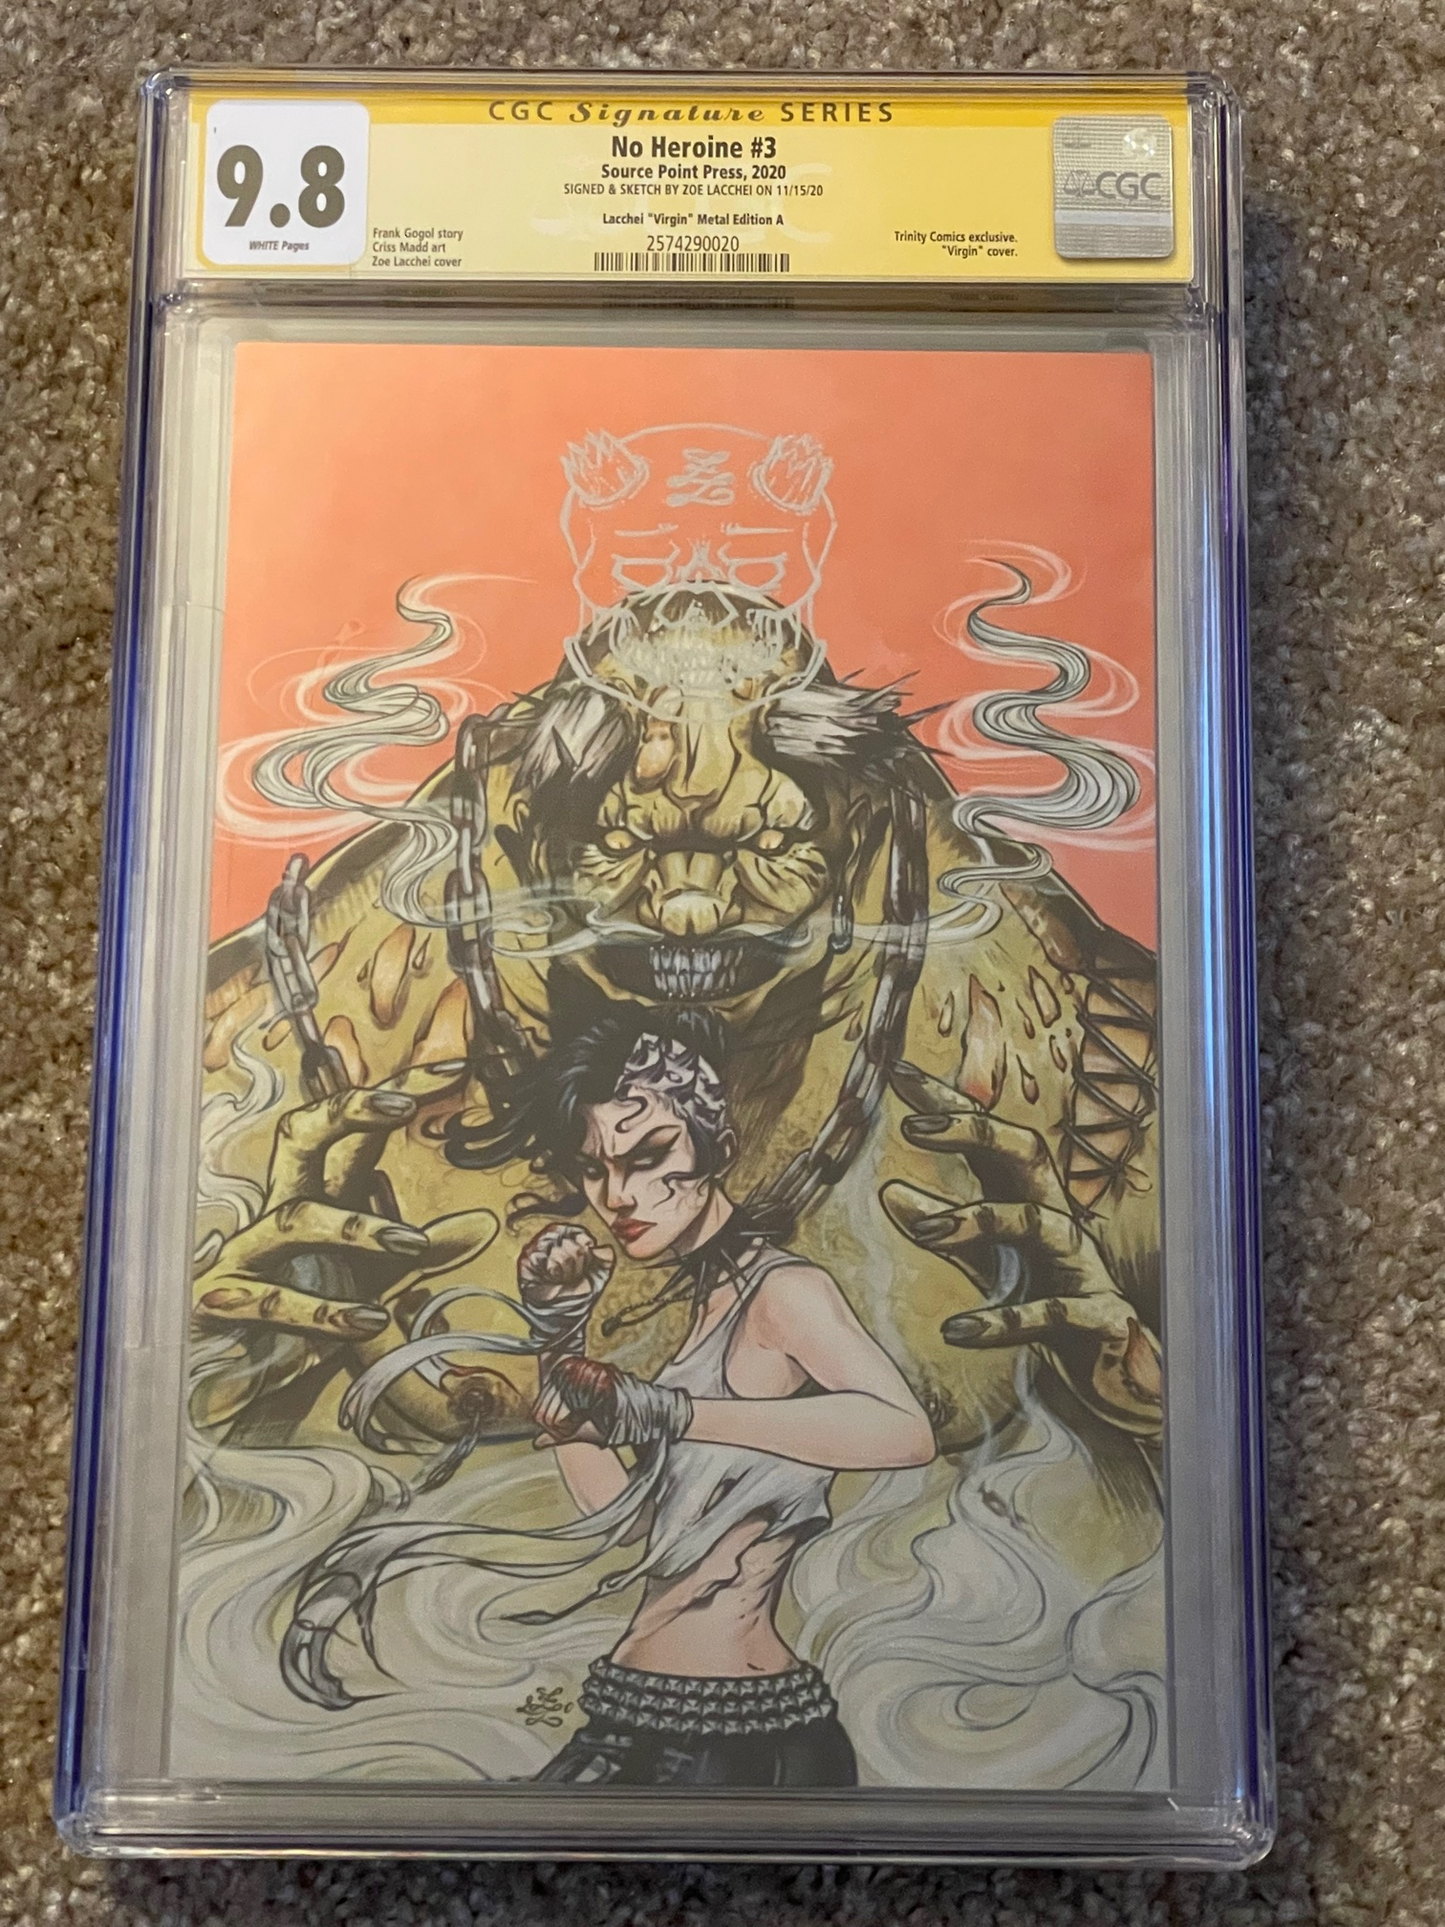 No Heroine #3 Metal CGC SS 9.8 Signed & Remarked by Zoe Lacchei